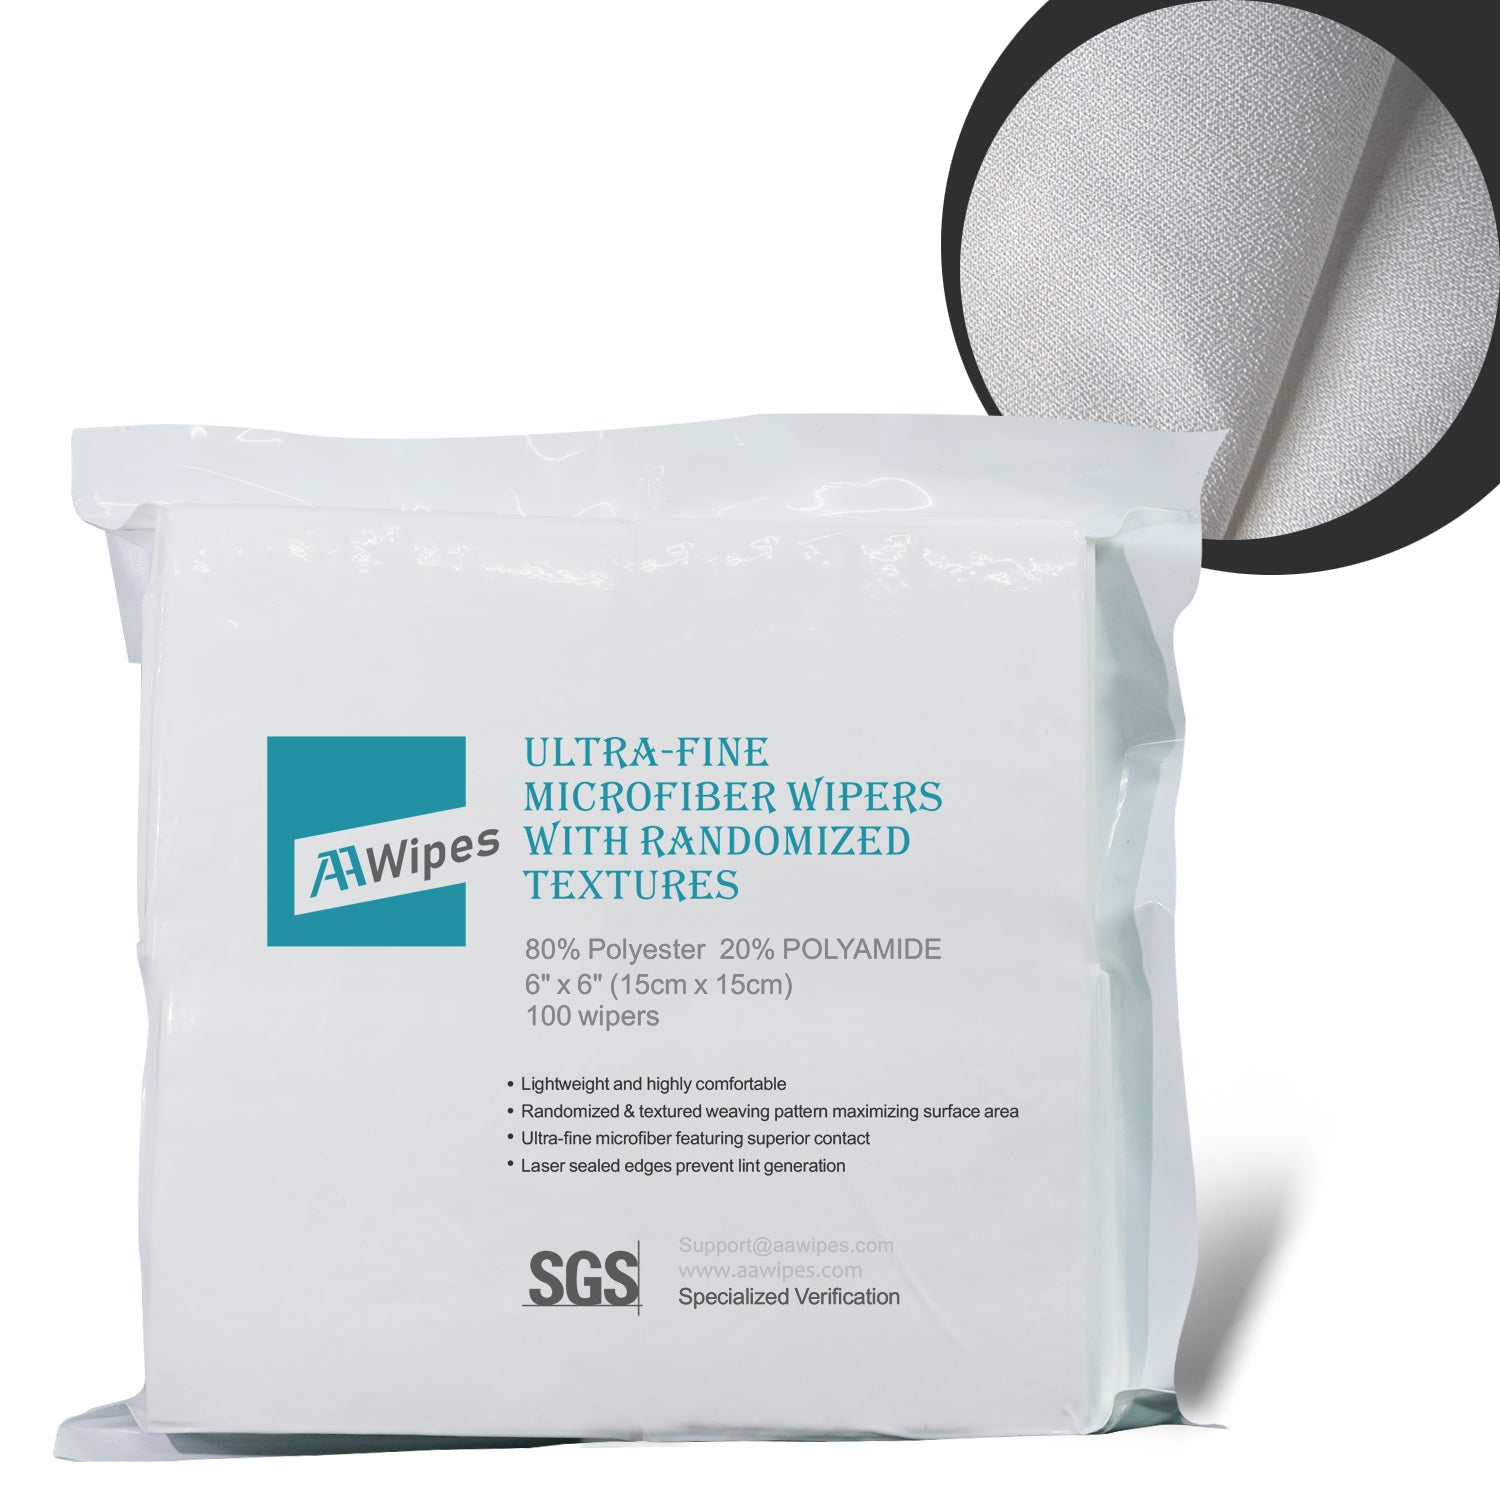 Superfine Microfiber Wipes Irregular Woven Linen 6"x6" (Starting at 1 Box 5,000 Wipes per 50 Bags) (No. MFR14006)